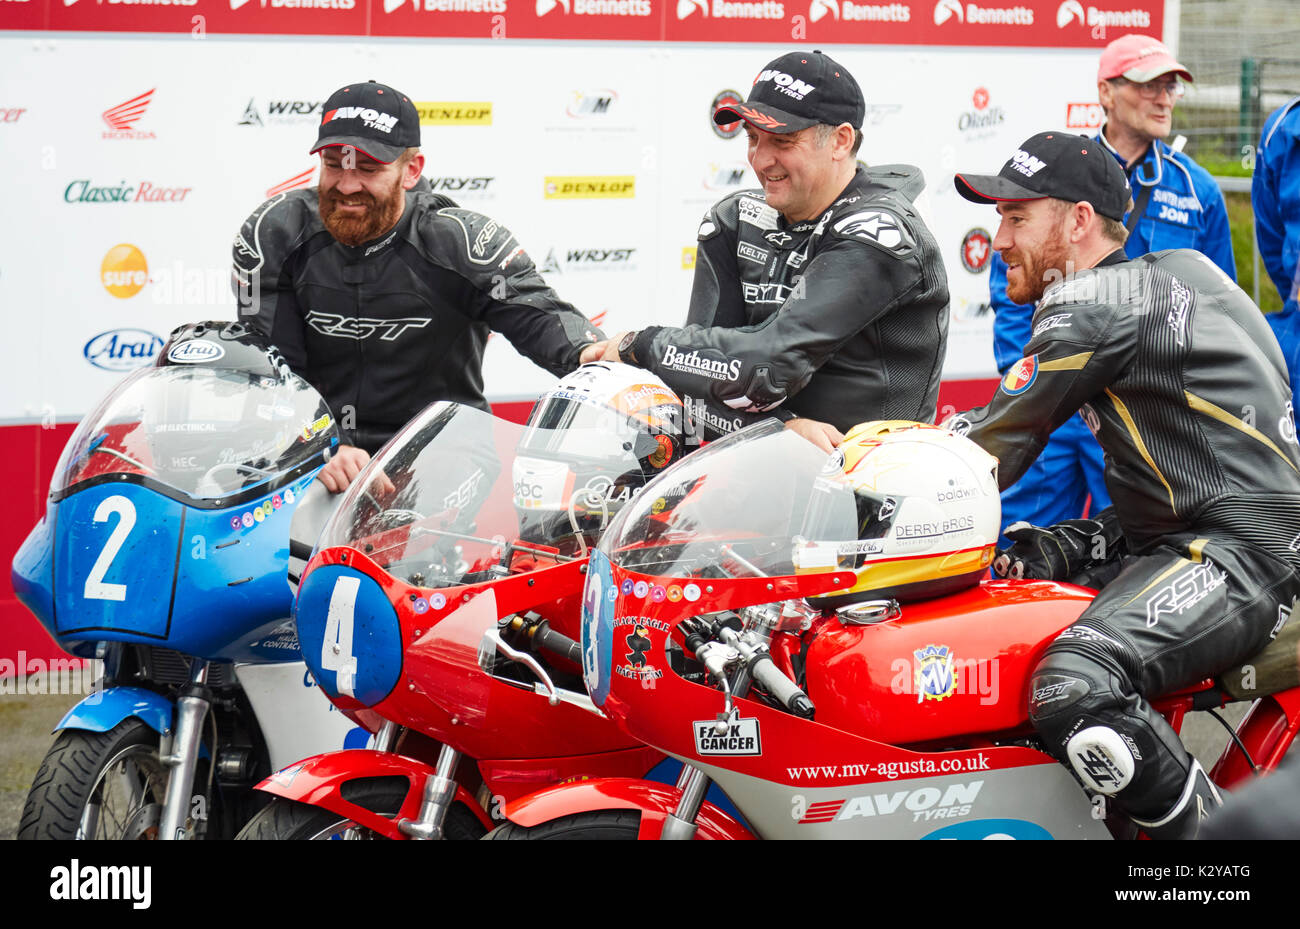 Winners of the 2017 Manx Junior Classic TT race pose for camera. Left (third) Jamie Coward, centre (winner) Michael Rutter and right (second) Lee John Stock Photo